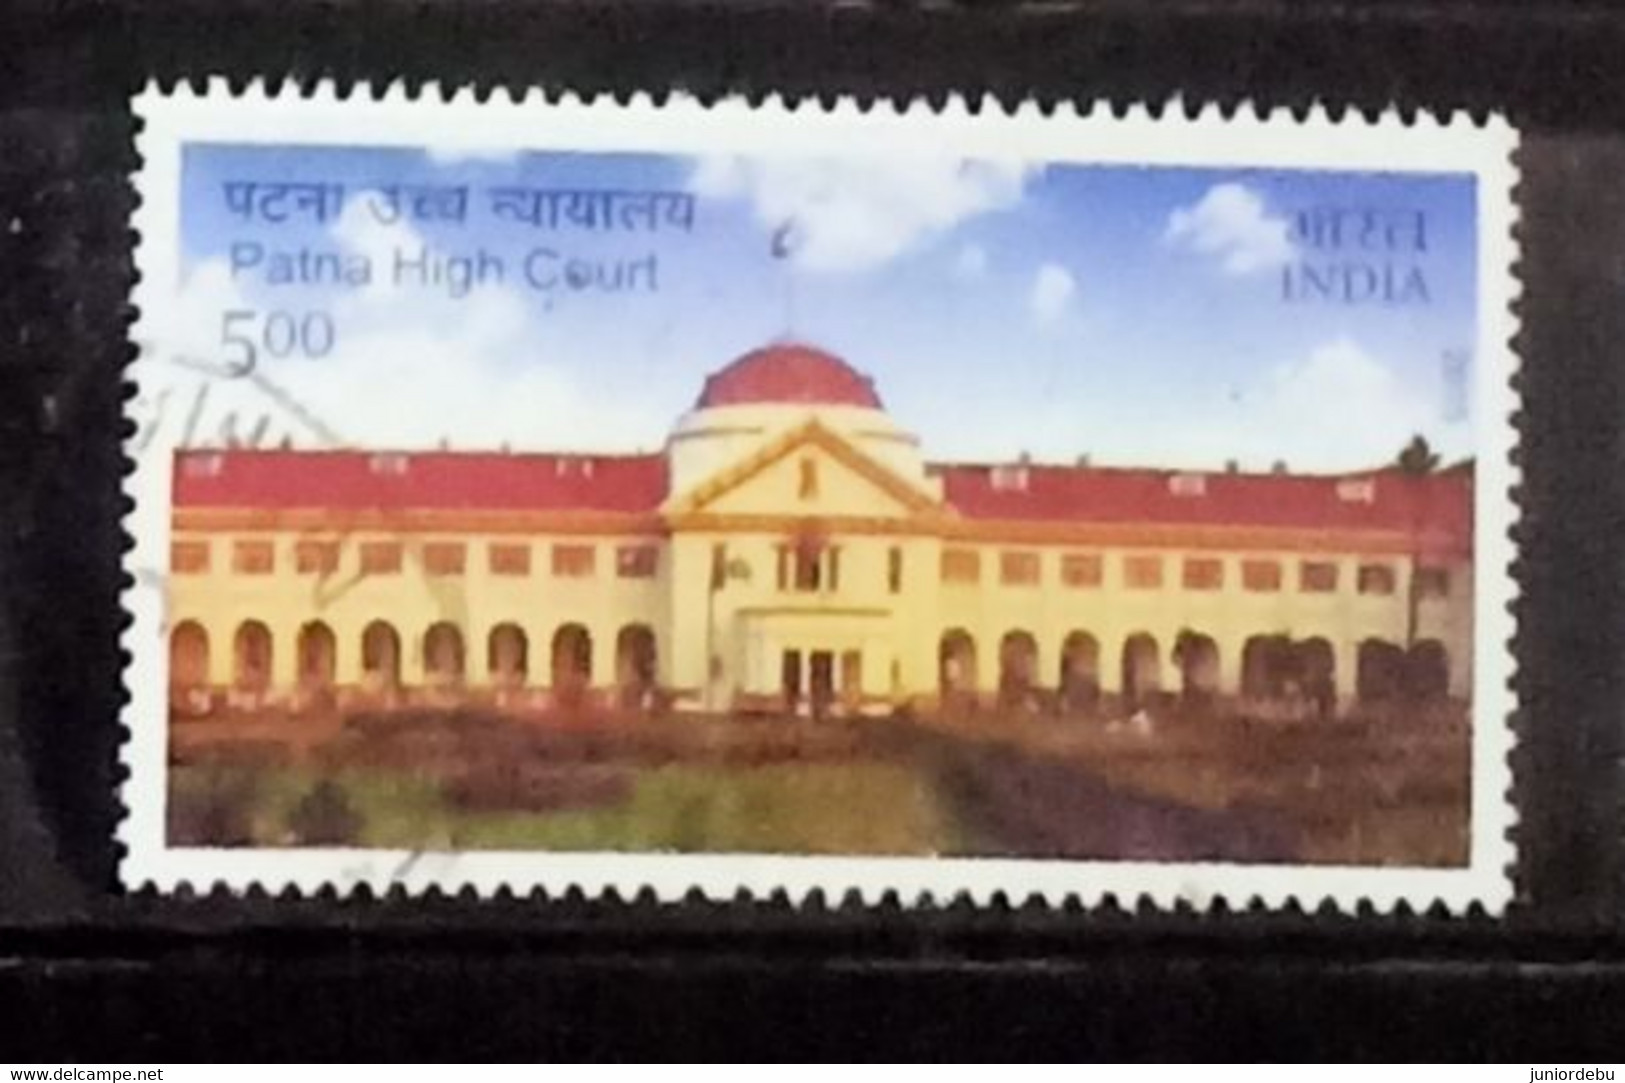 India - 2015 -  Patna High Court   - Used. Condition As Per Scan. - Oblitérés